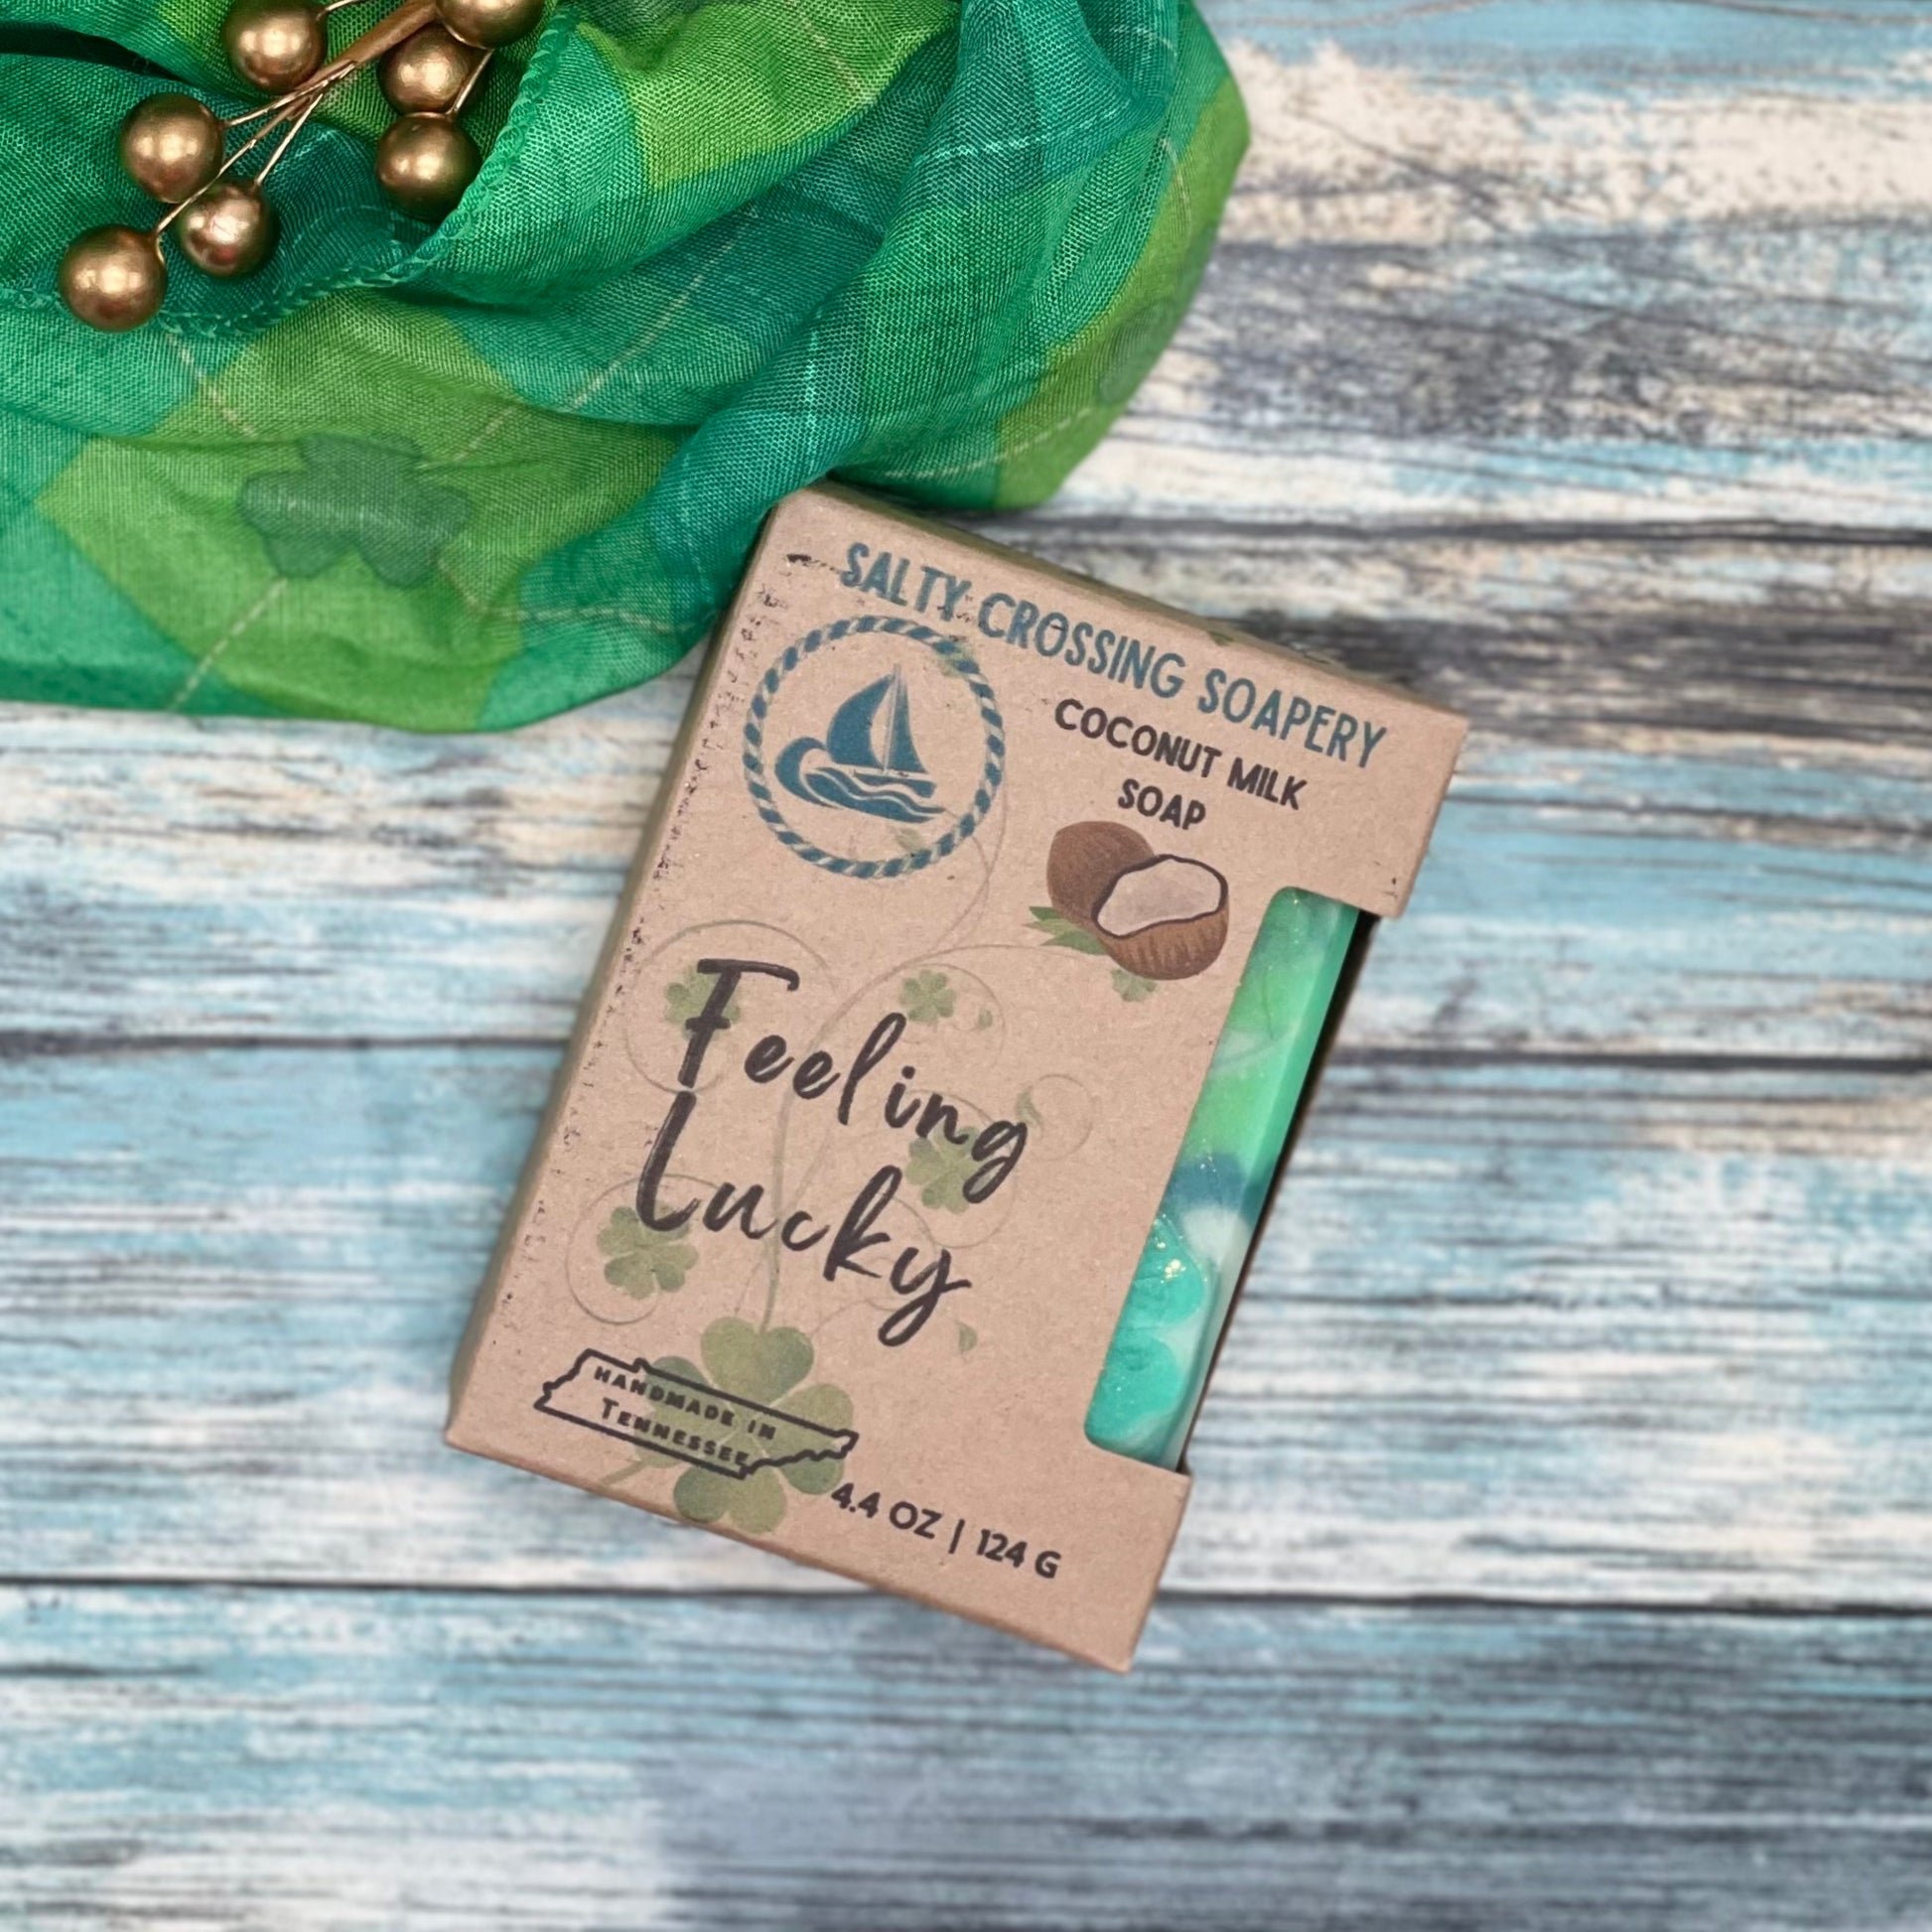 Feeling lucky soap in box. Kraft paperboard box with color text and graphics.